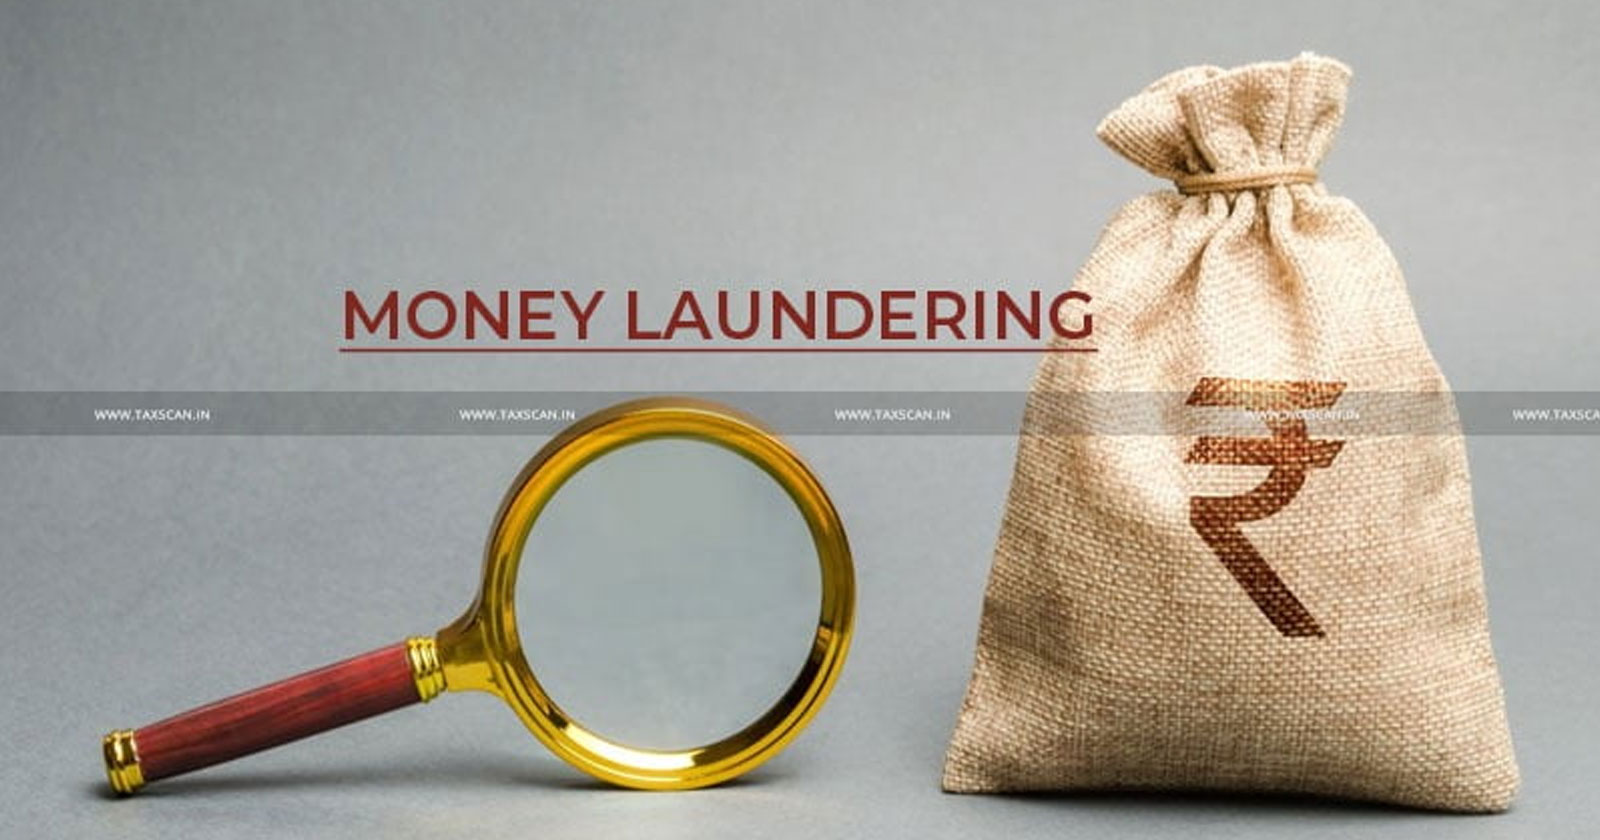 PMLA - Prevention of Money Laundering Act - Jammu and Kashmir high court - TAXSCAN